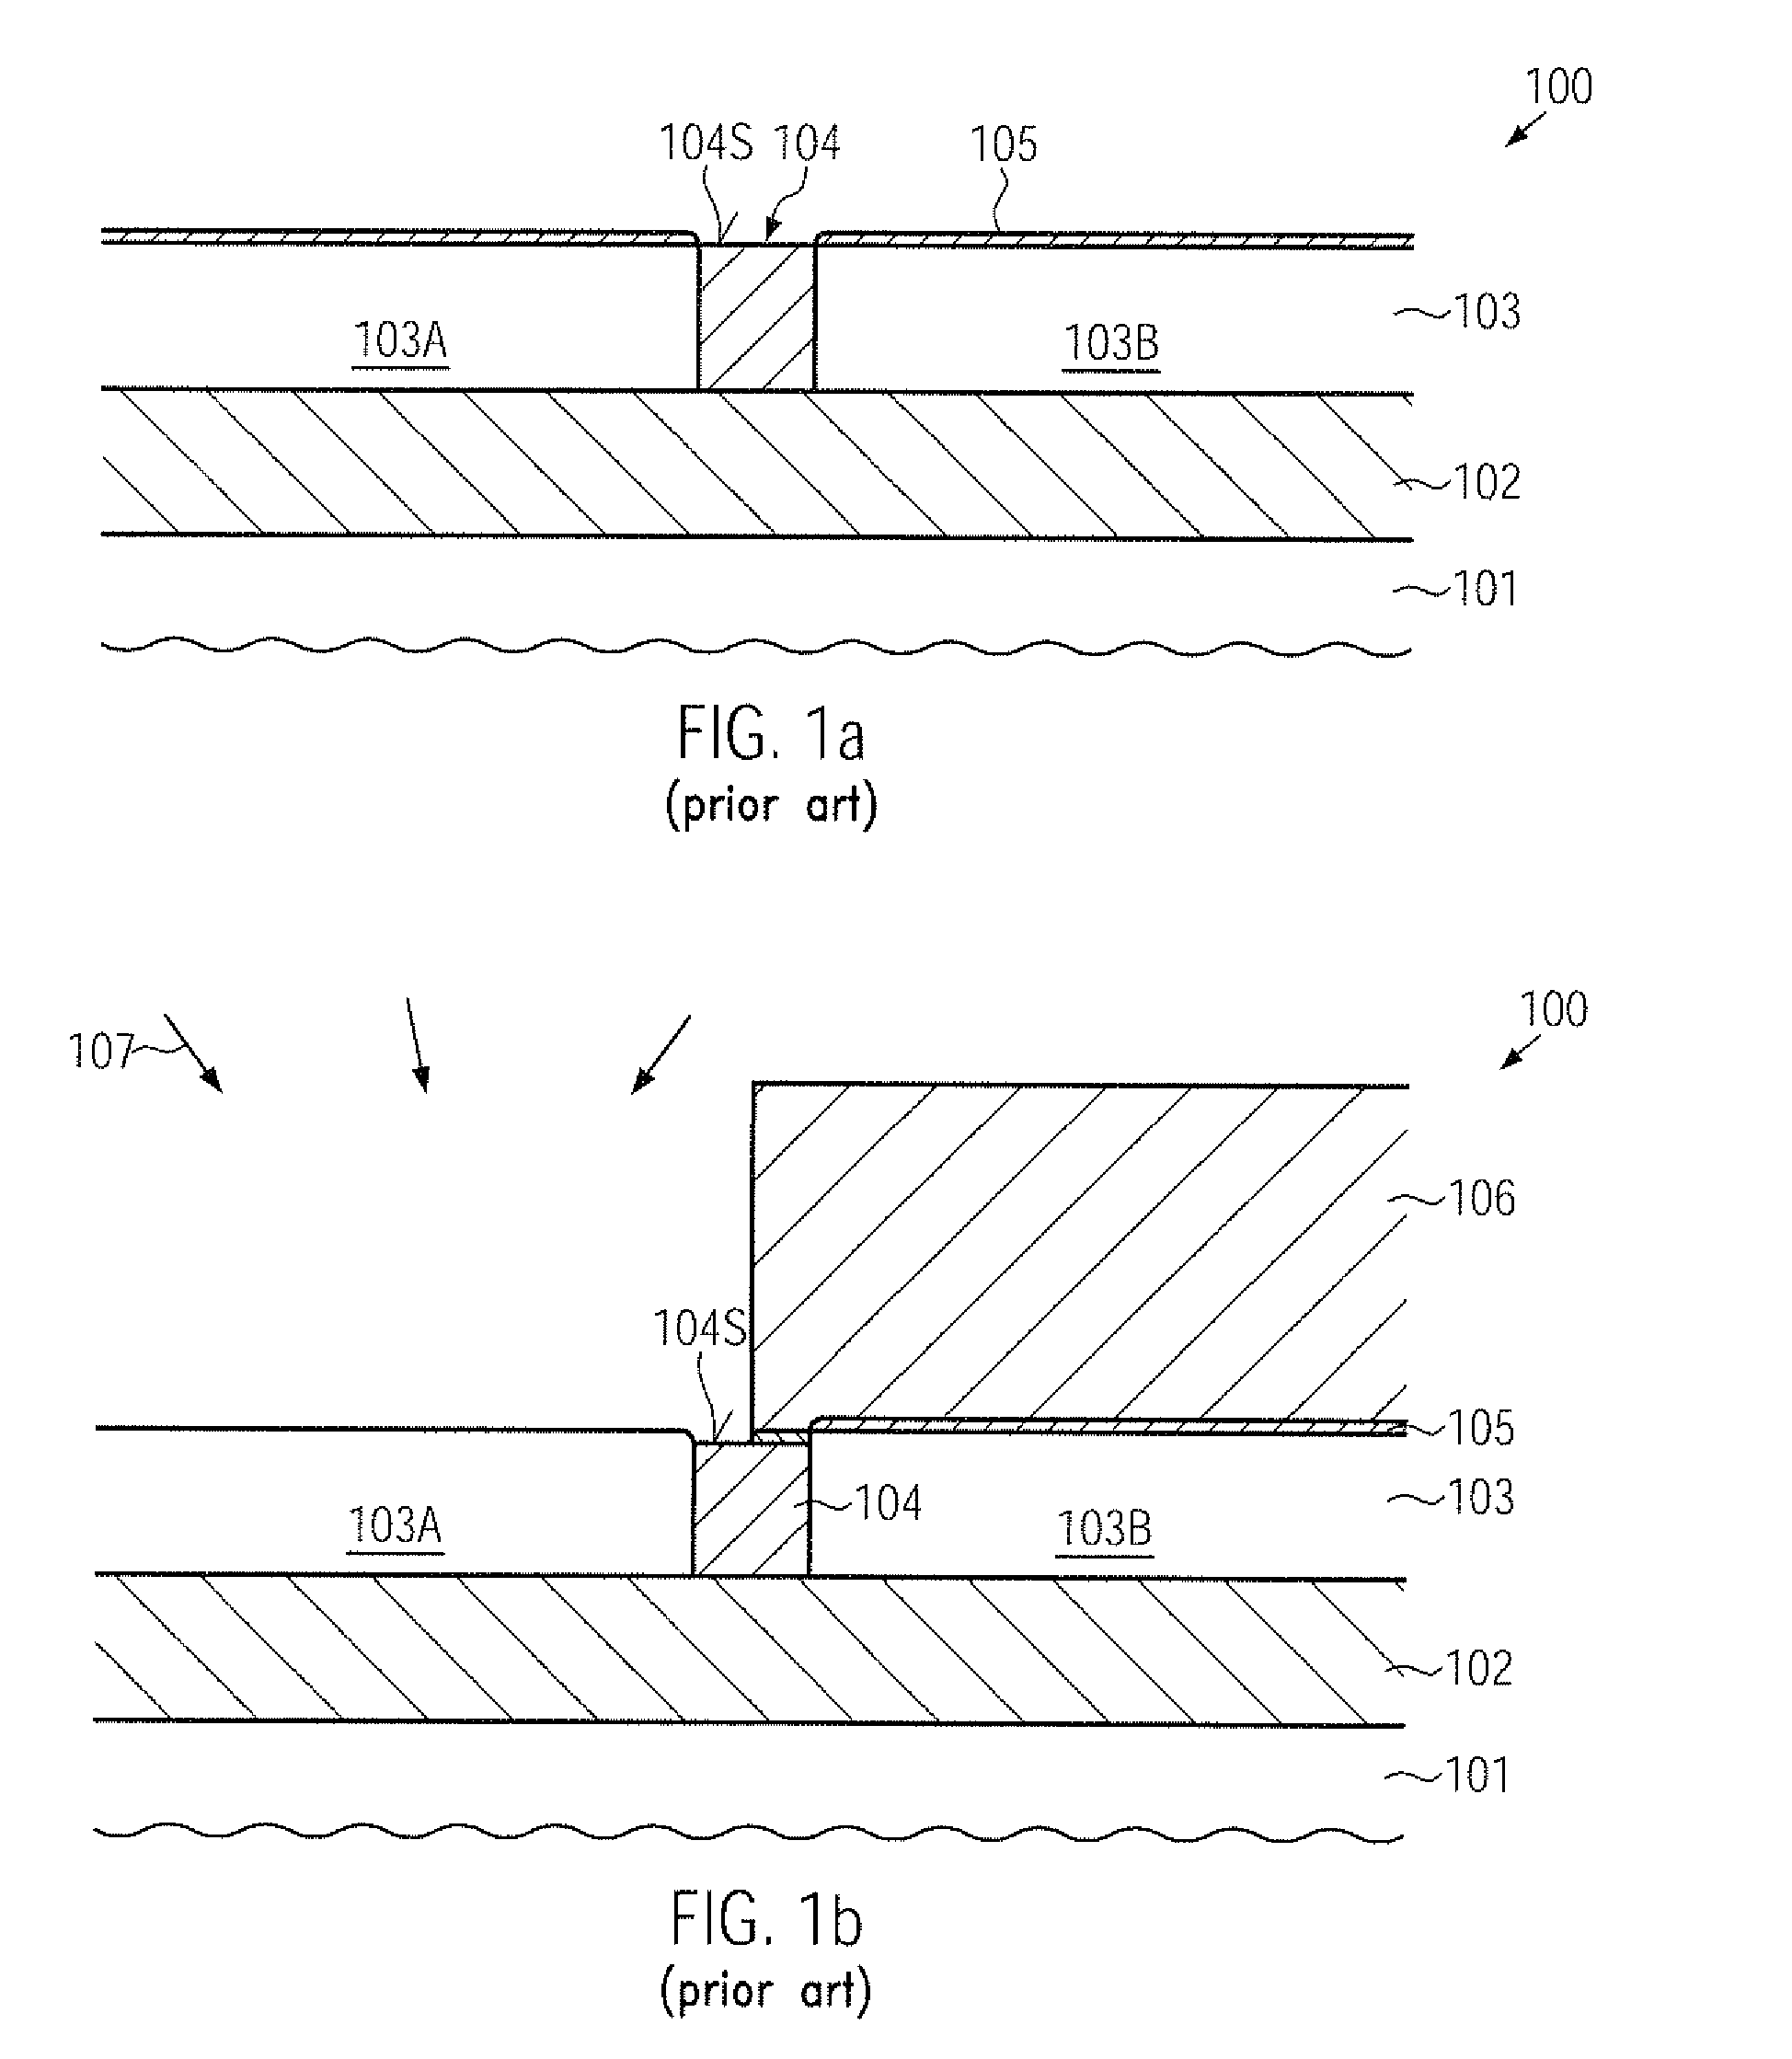 Reduction of thickness variations of a threshold semiconductor alloy by reducing patterning non-uniformities prior to depositing the semiconductor alloy